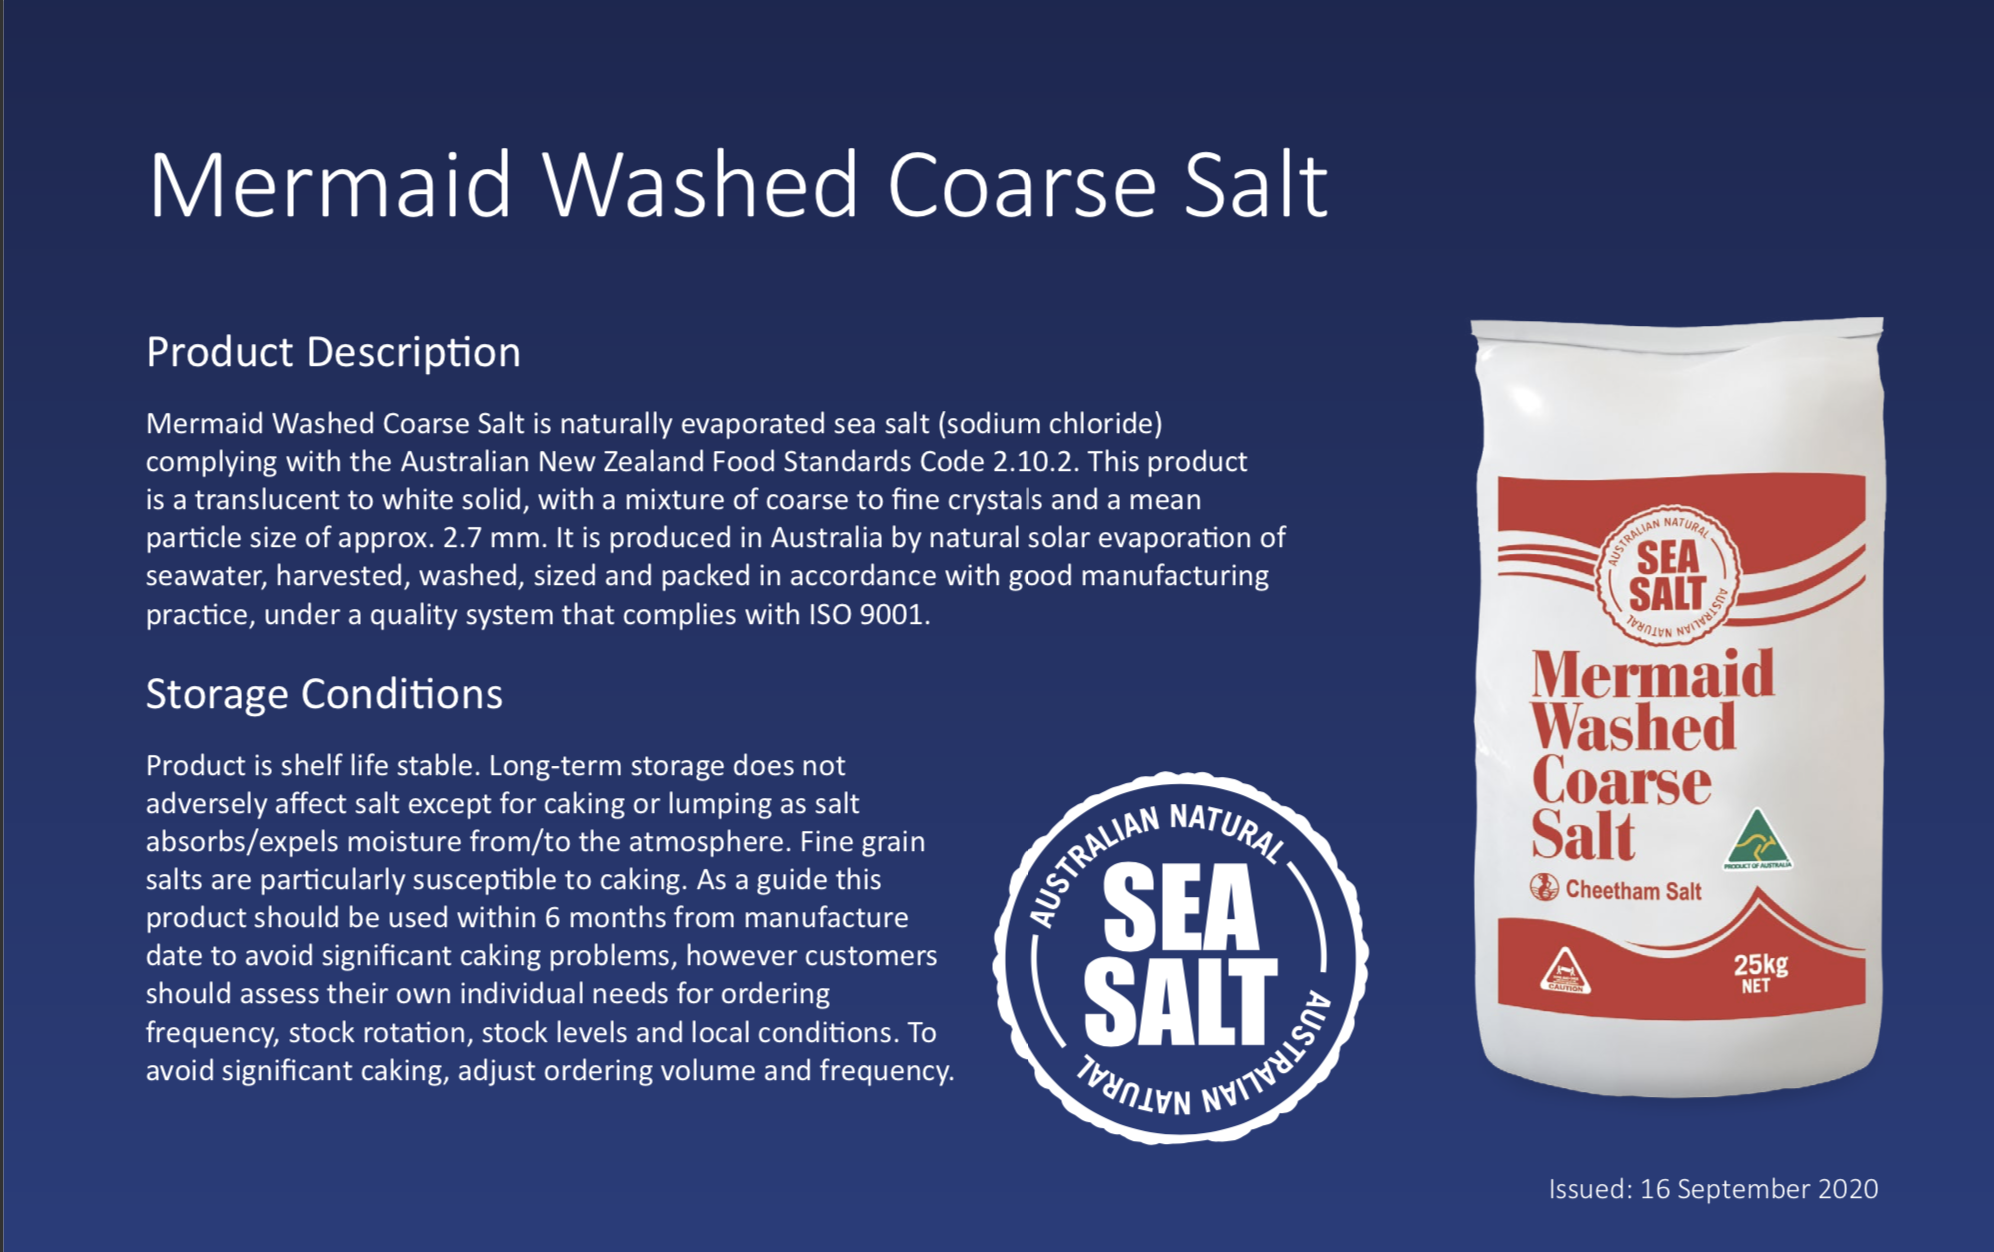 Mermaid Washed Coarse Salt product description. The product description includes information about the food grade salt as well as storage information.